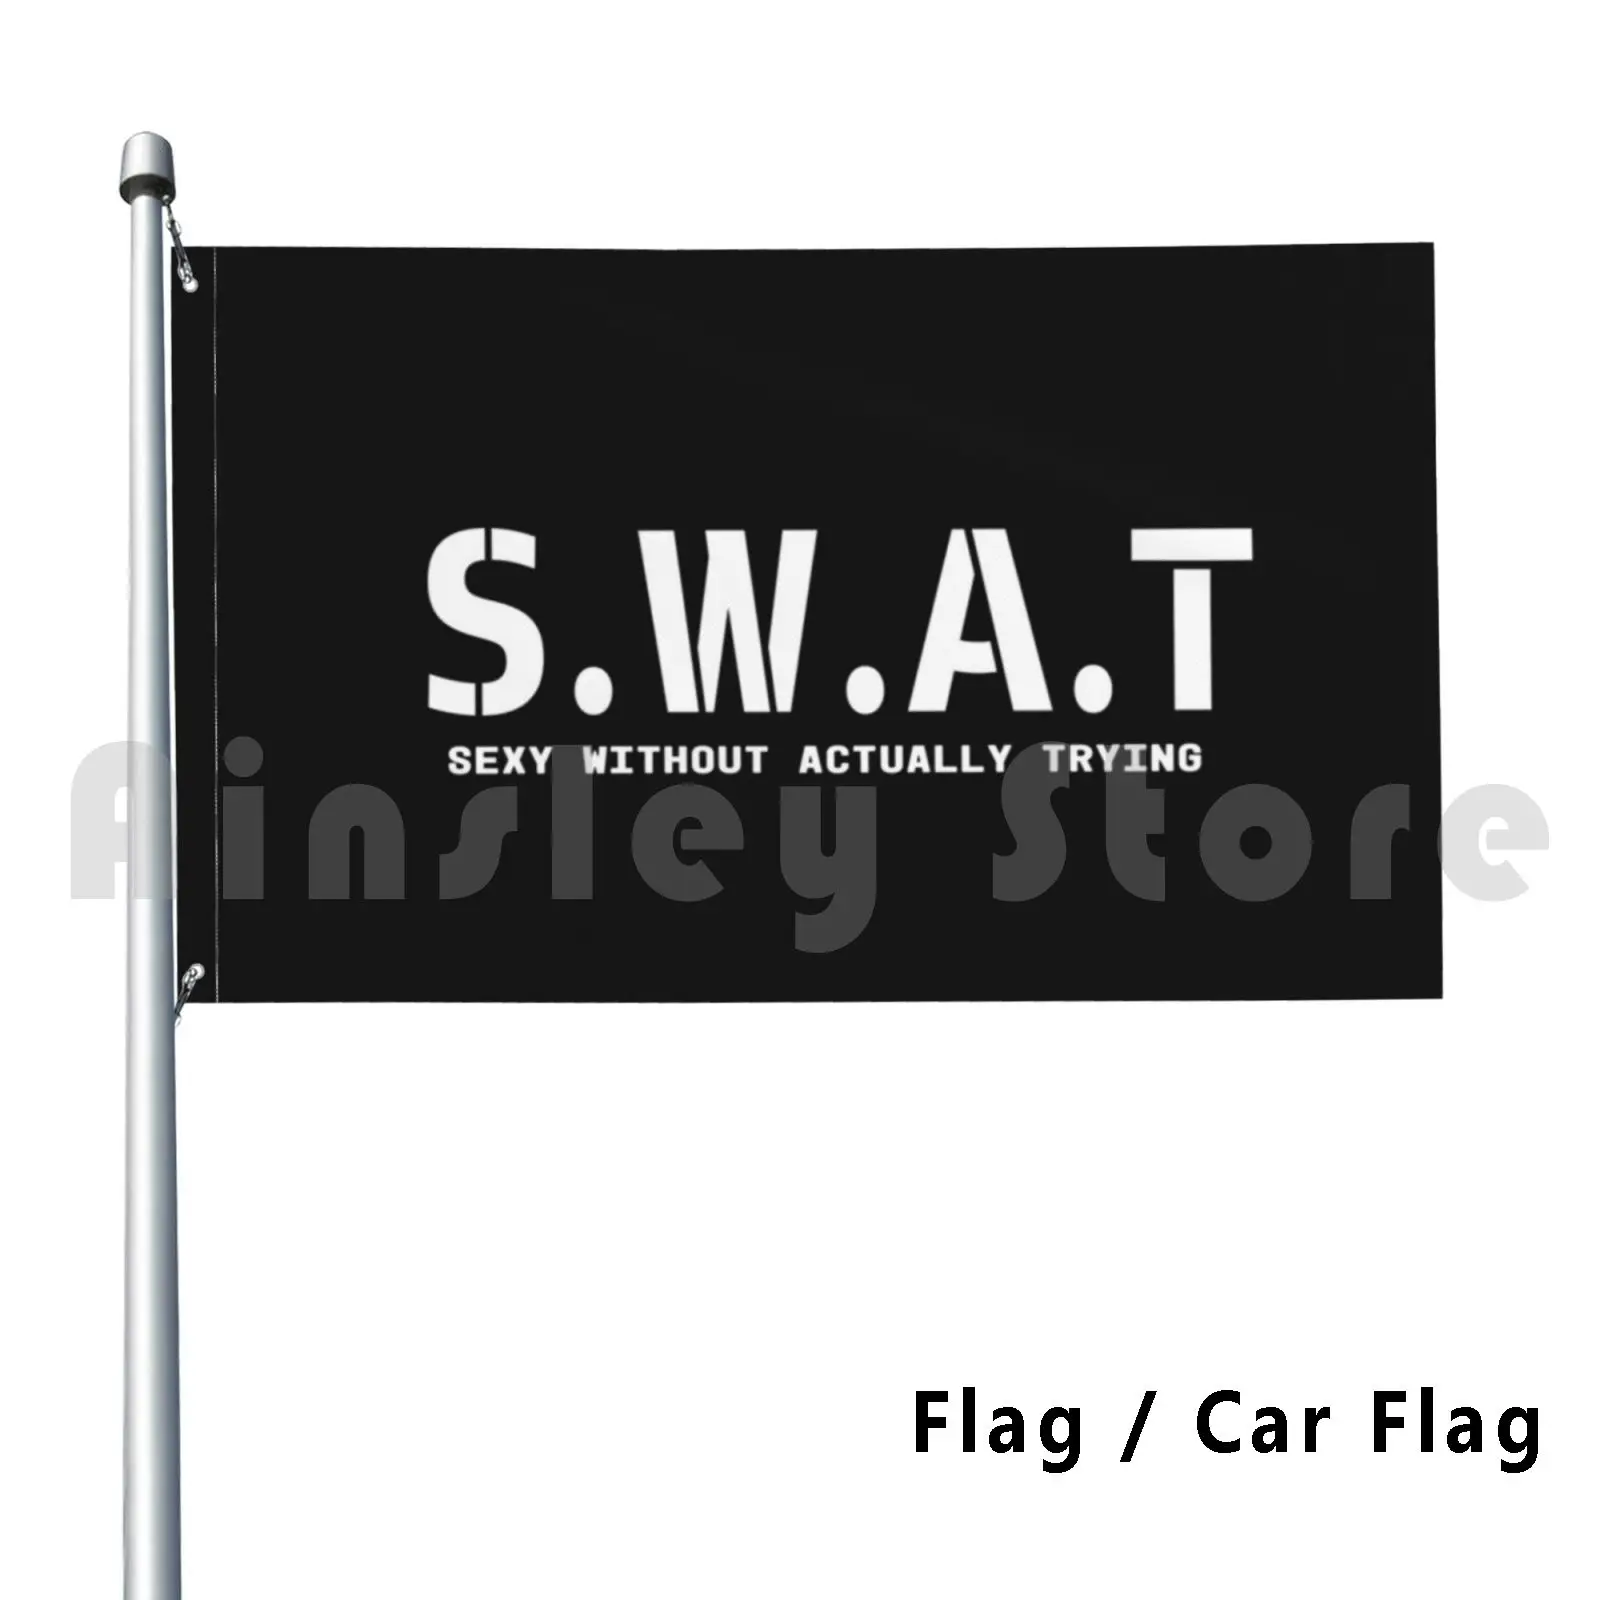 Sexy Swat Flag Car Flag Funny Funny Fbi Swat S W A T Laughs Sexy Costume Without Trying Police